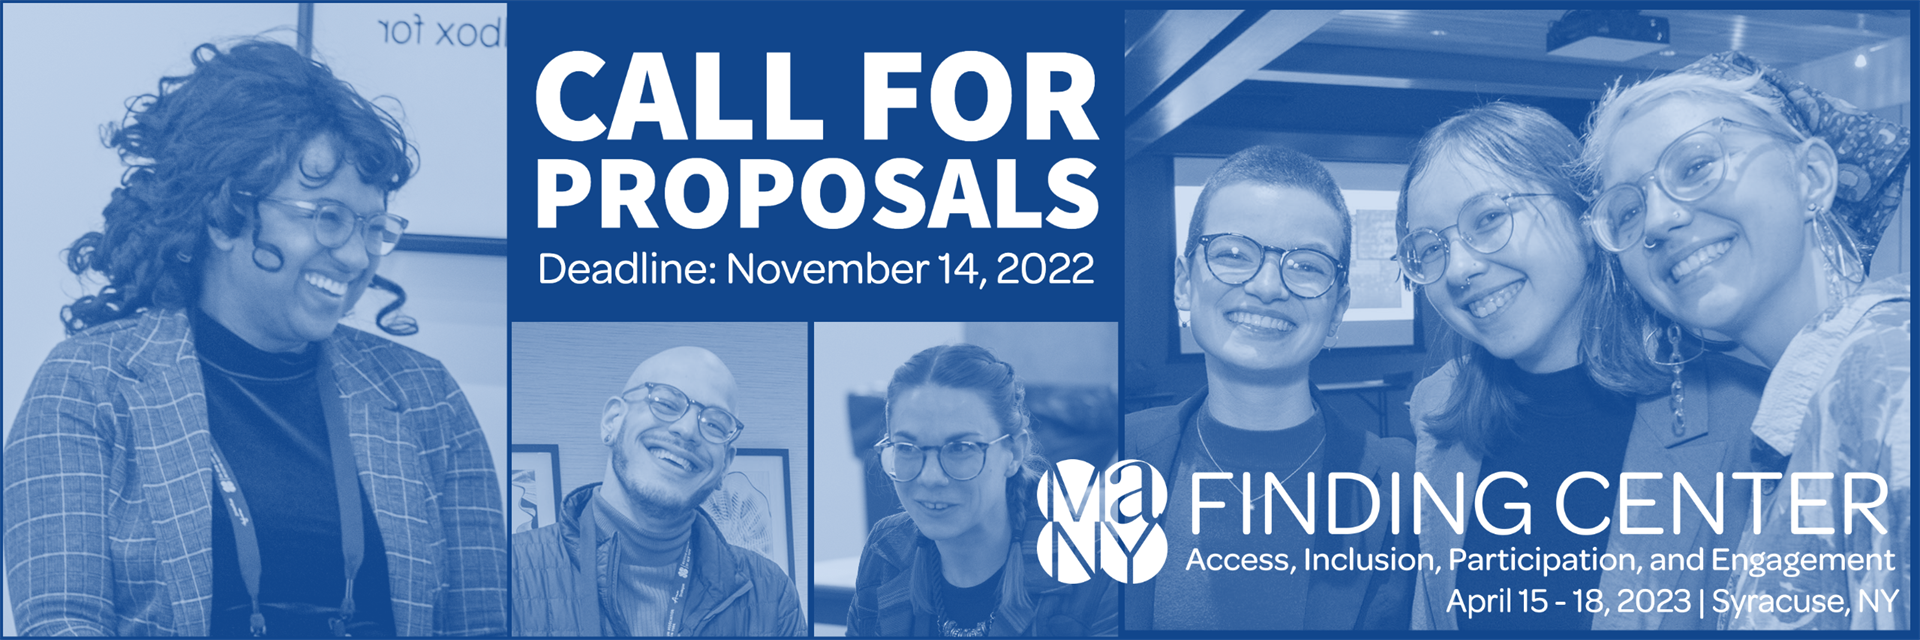 Call for Proposals 2023 Annual Conference  Finding Center: Access, Inclusion, Participation, and Engagement April 15 - 18, 2023 | Syracuse, NY Deadline: November 14, 2022   